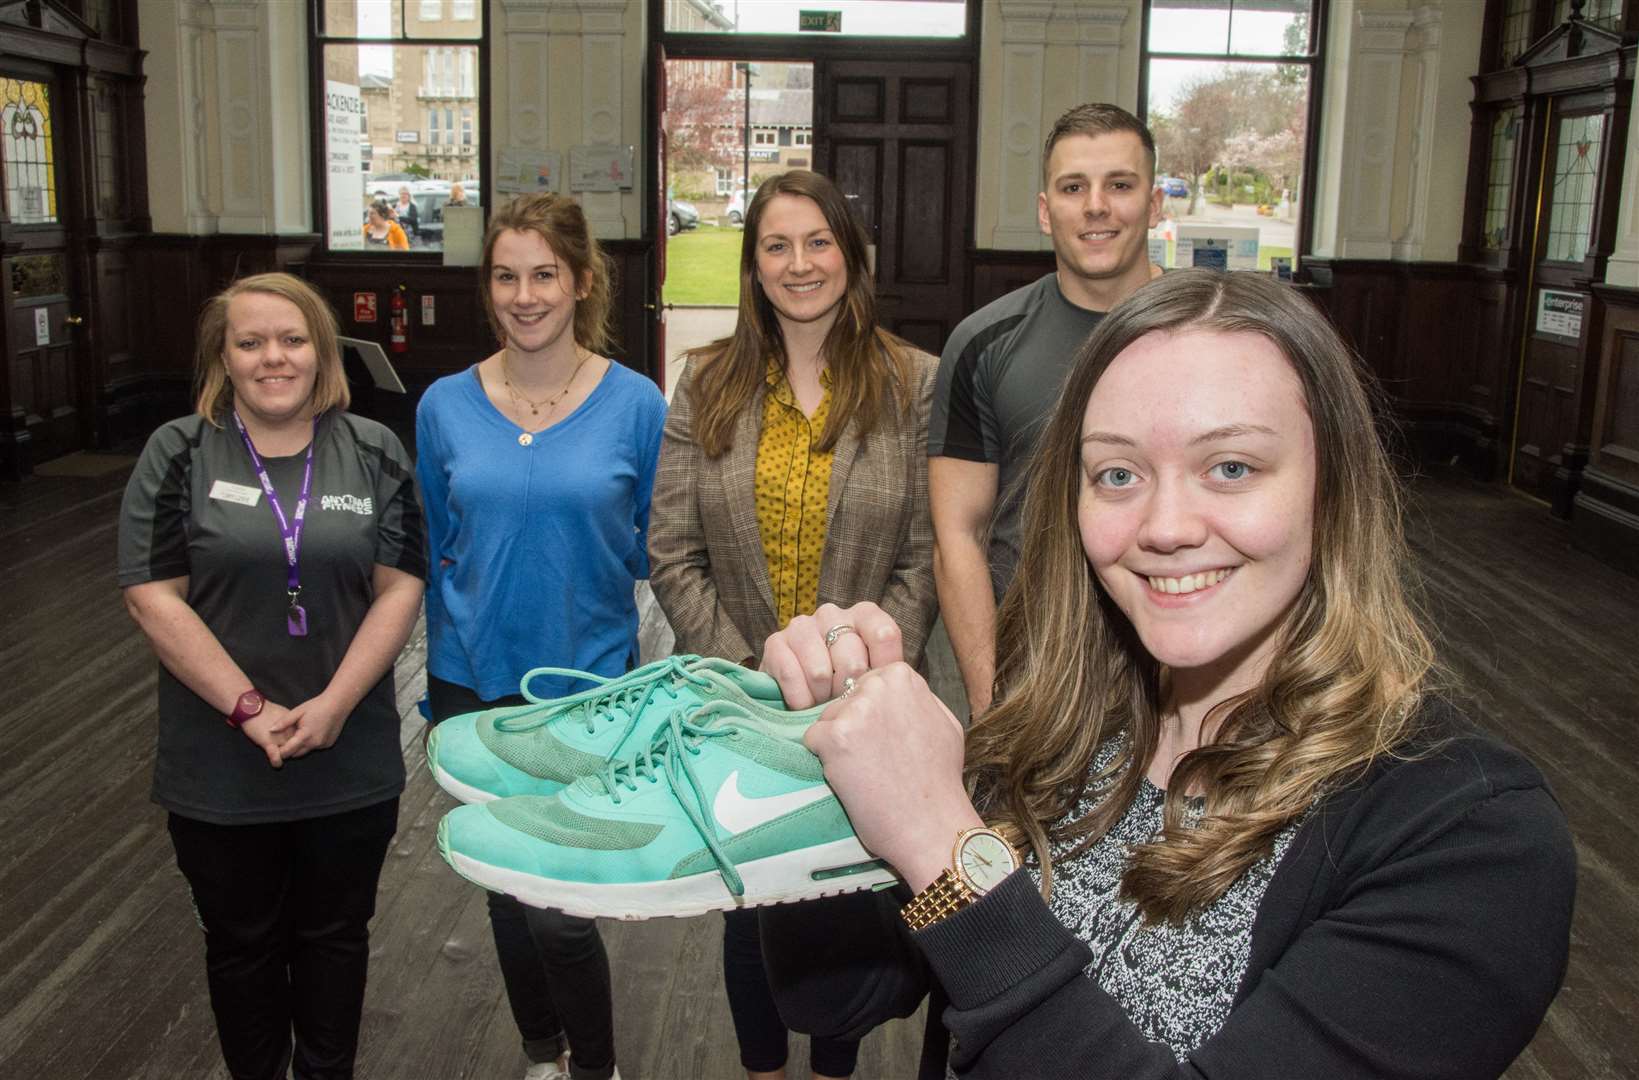 Stepping out to launch Moray Chamber's Active April programme are (from left) Laura MacPherson, Maelle Le Ravallec, Sarah Medcraf, Adam Betteridge and Aimee Stephen. Picture: Becky Saunderson. Image No.043574.